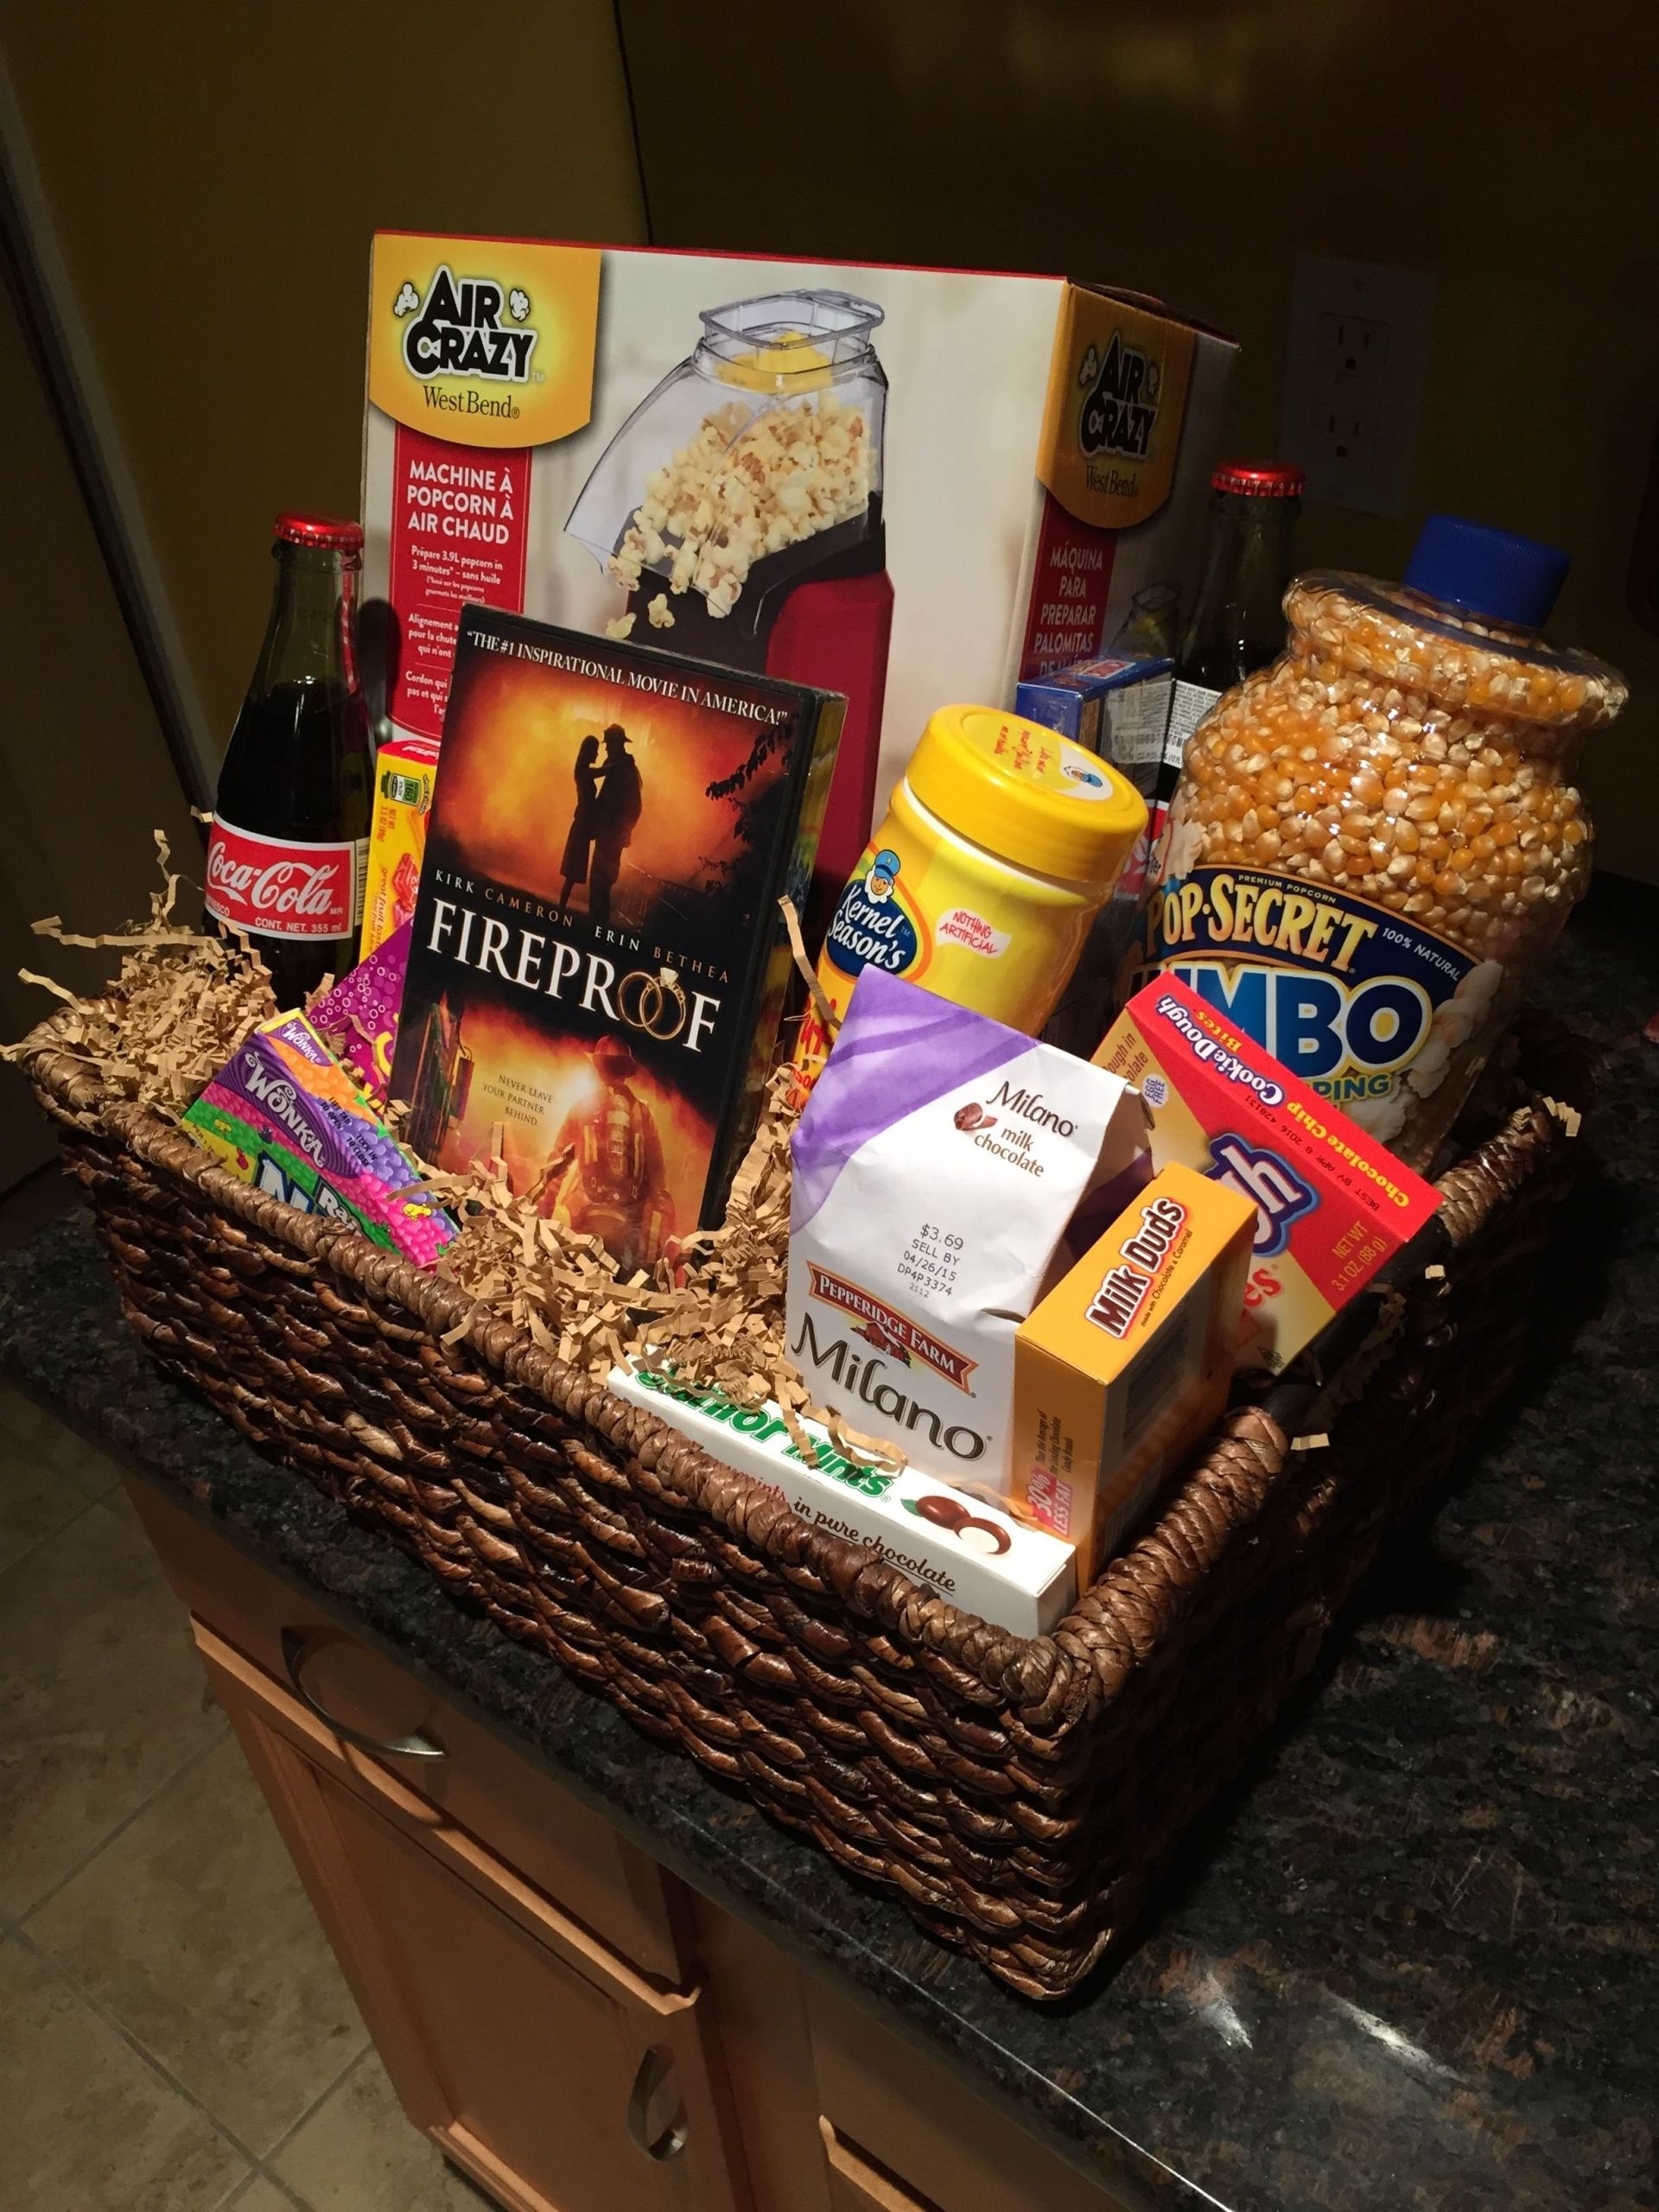 Themed Gift Basket Ideas For Auctions
 10 Best Ideas For Gift Baskets For Fundraisers 2019